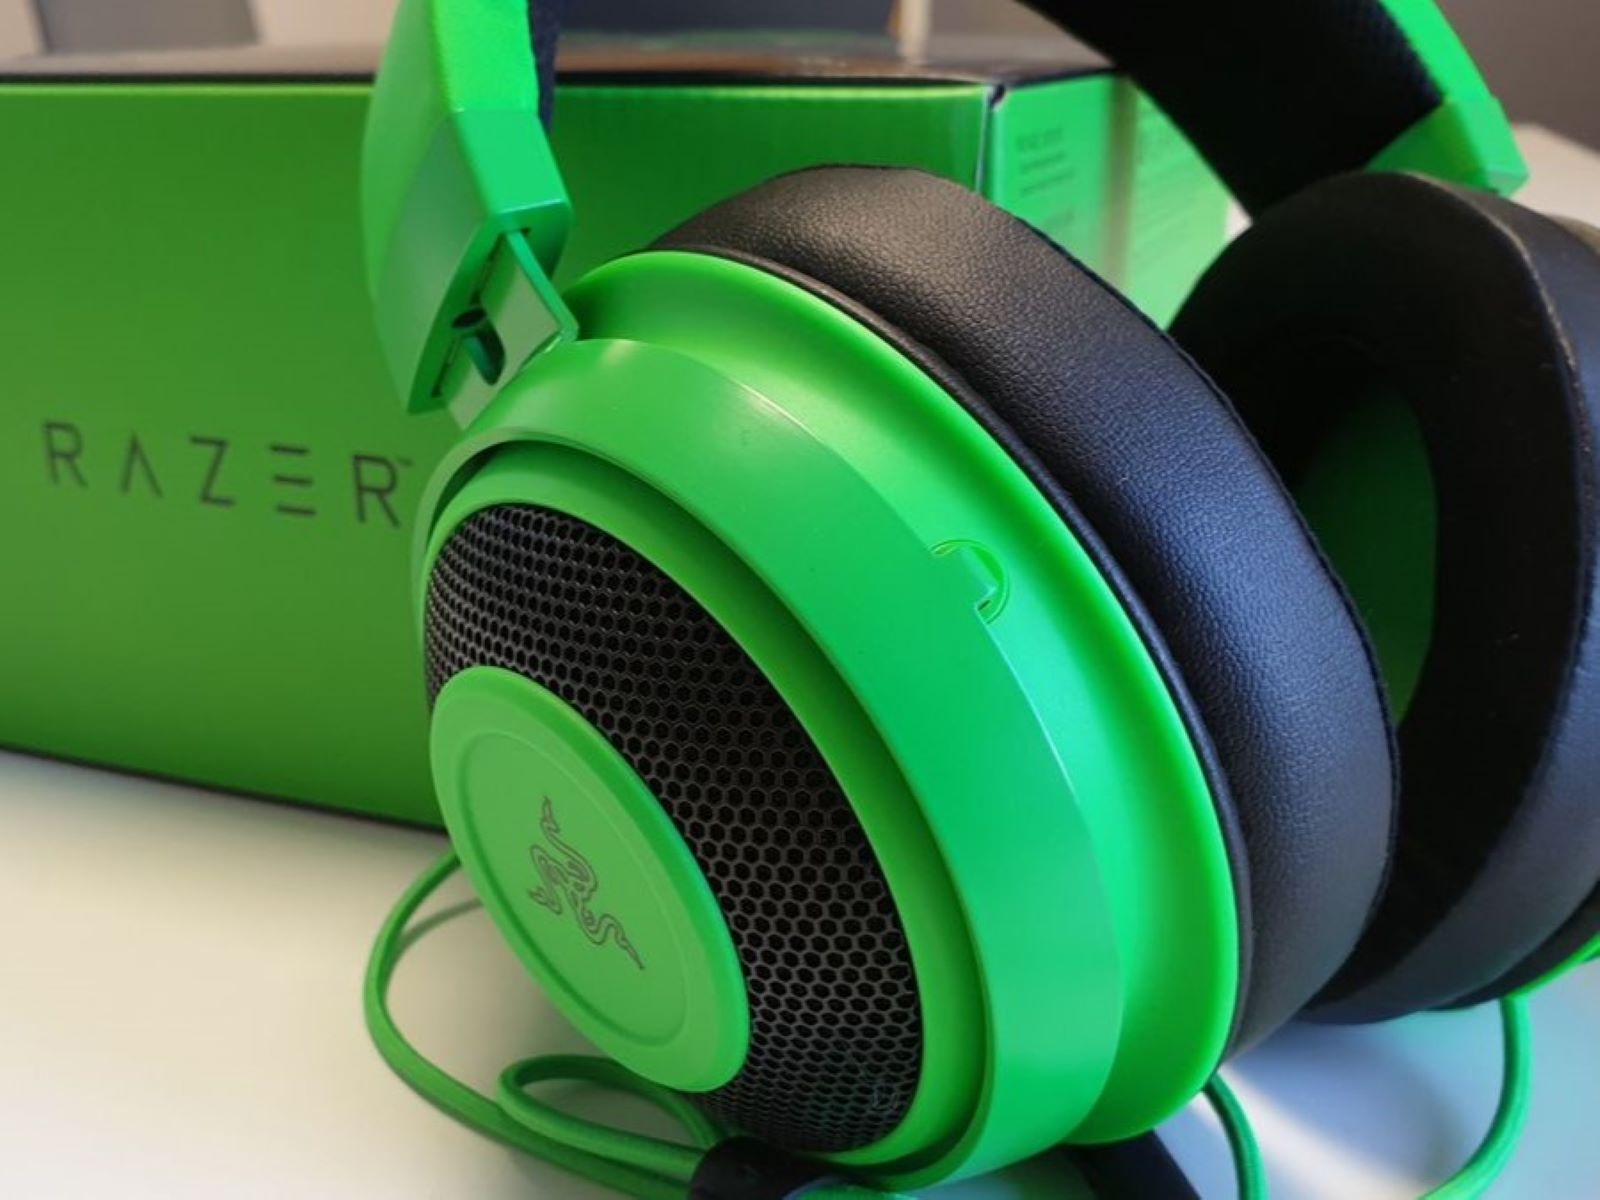 Resolving Audio Cut-Outs In Razer Headsets